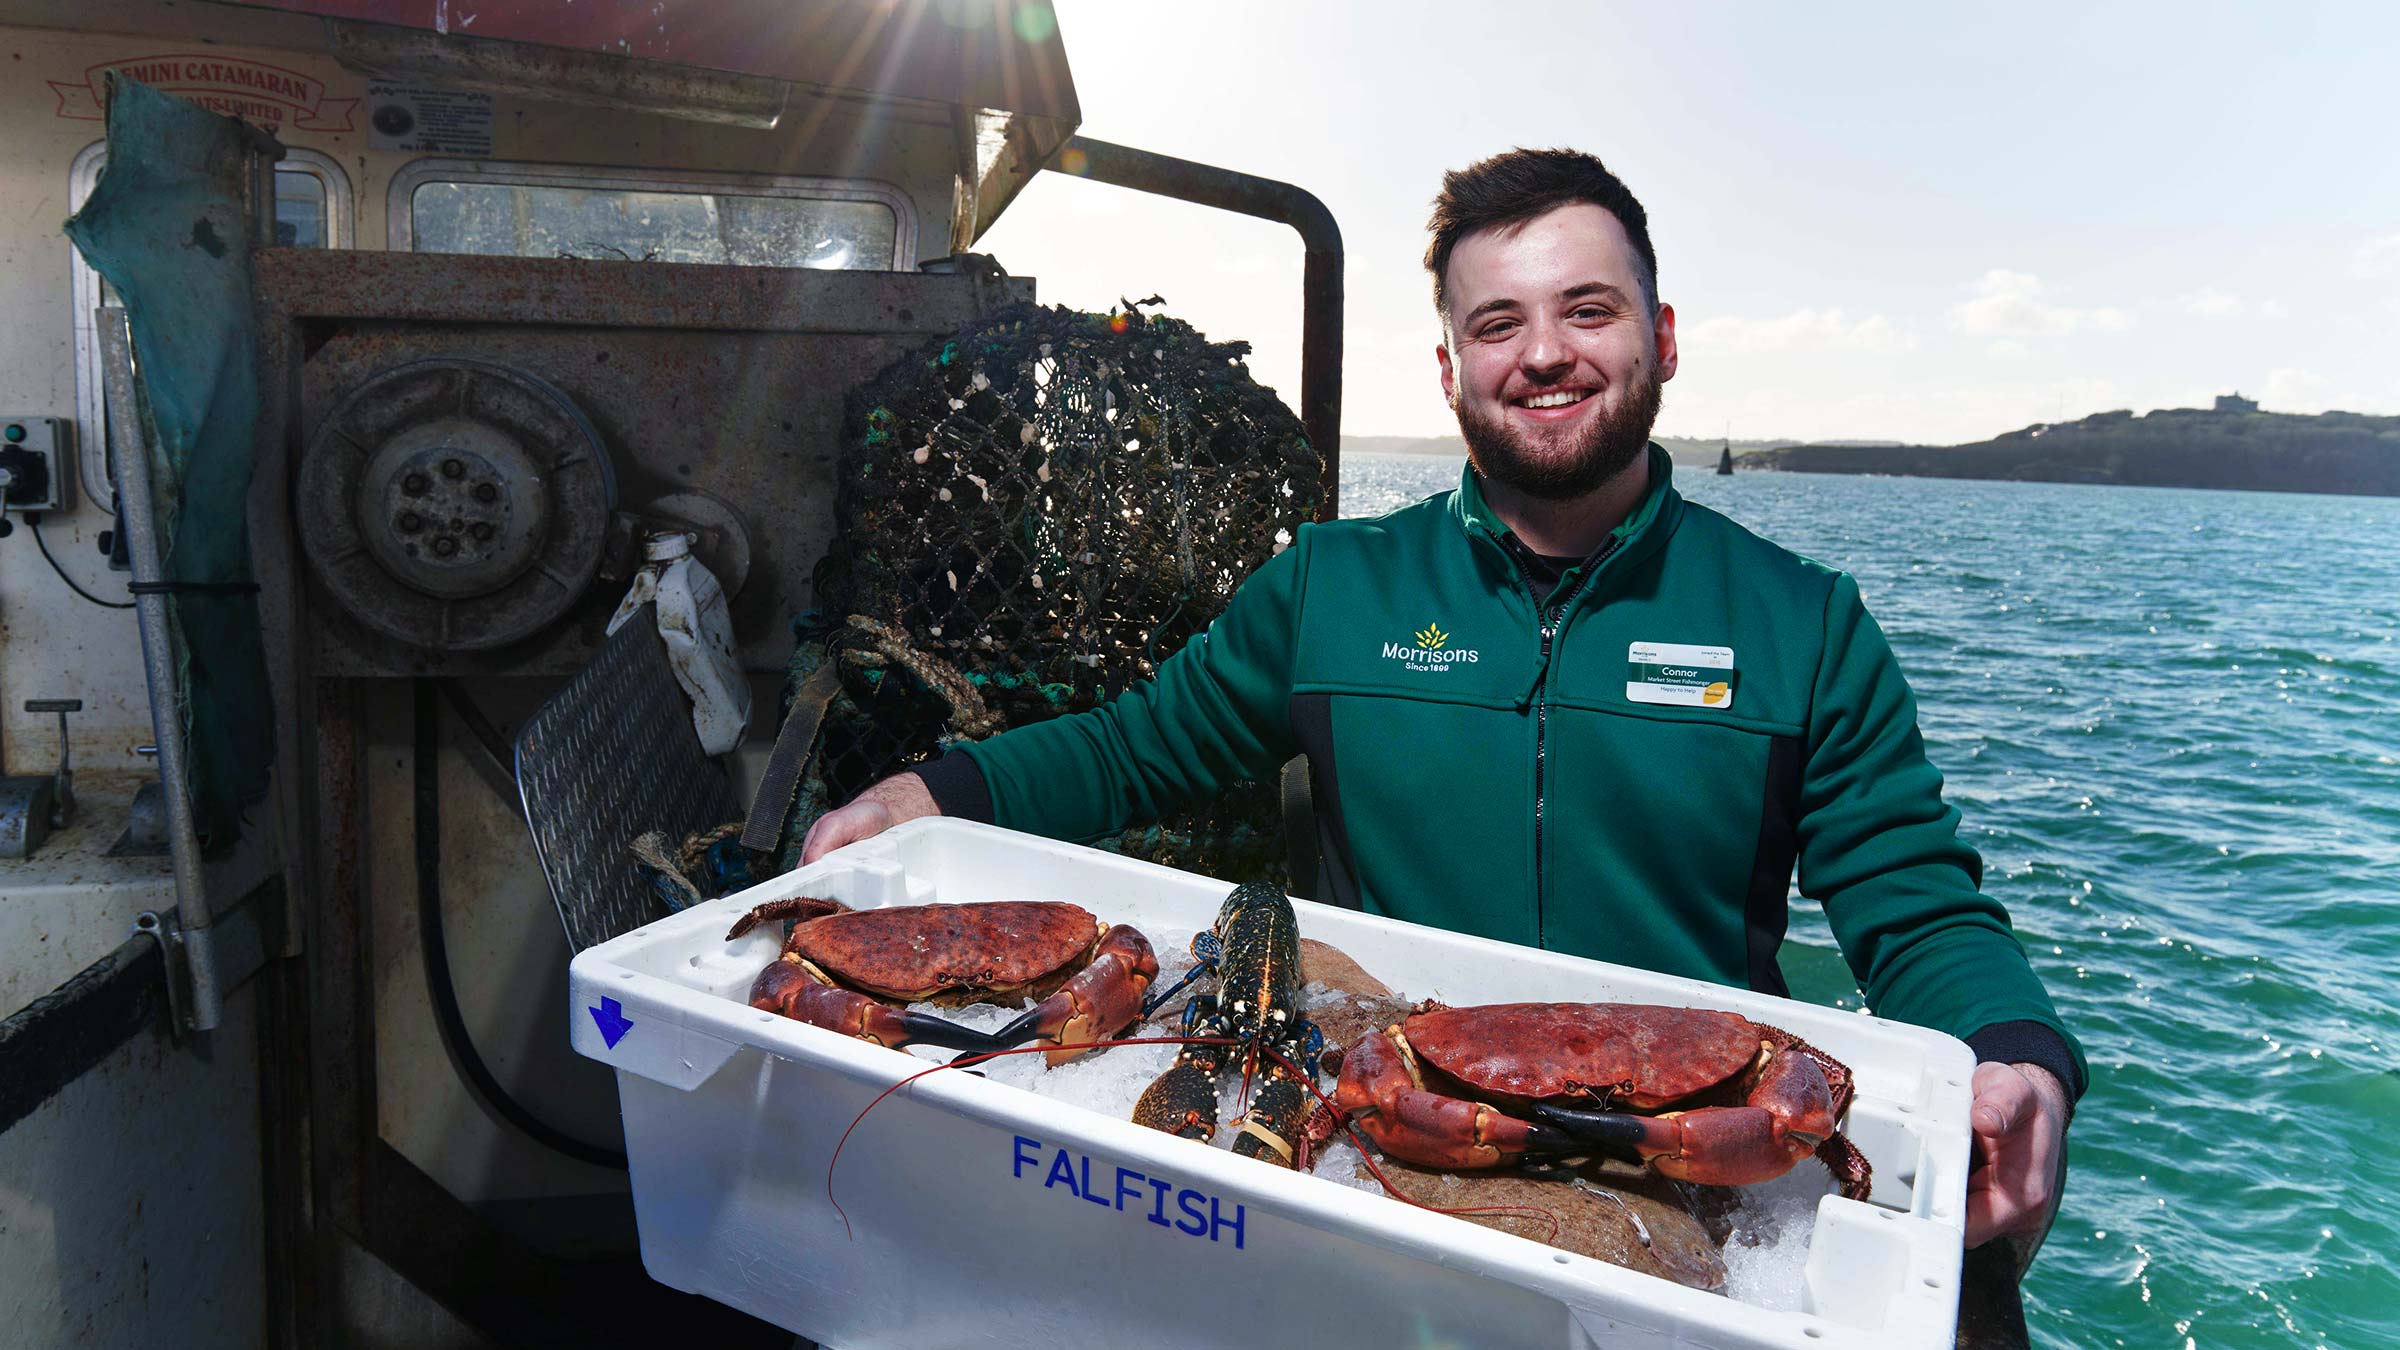 Morrisons is the first grocer to own its own fishing boat